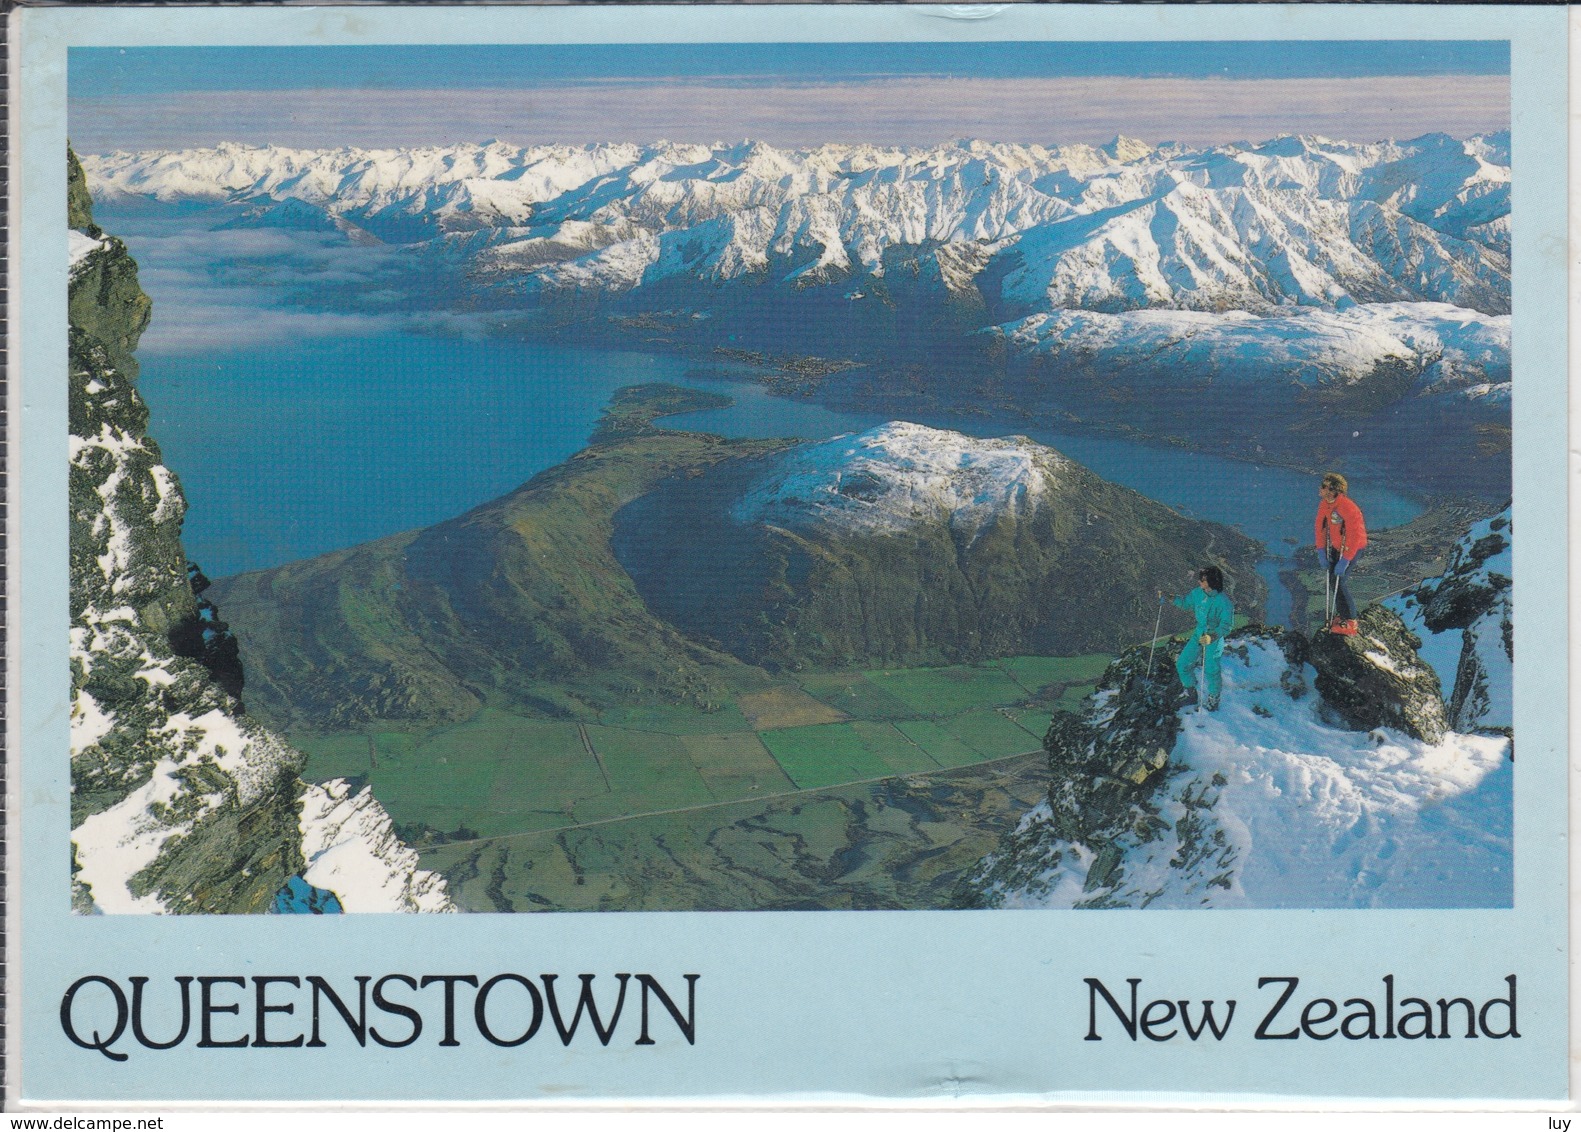 NEW ZEALAND  QUEENSTOWN  Skifield , View Of Snowclad Mountains, Shores Of Lake Wakatipu  Large Format, Nice Stamp - New Zealand